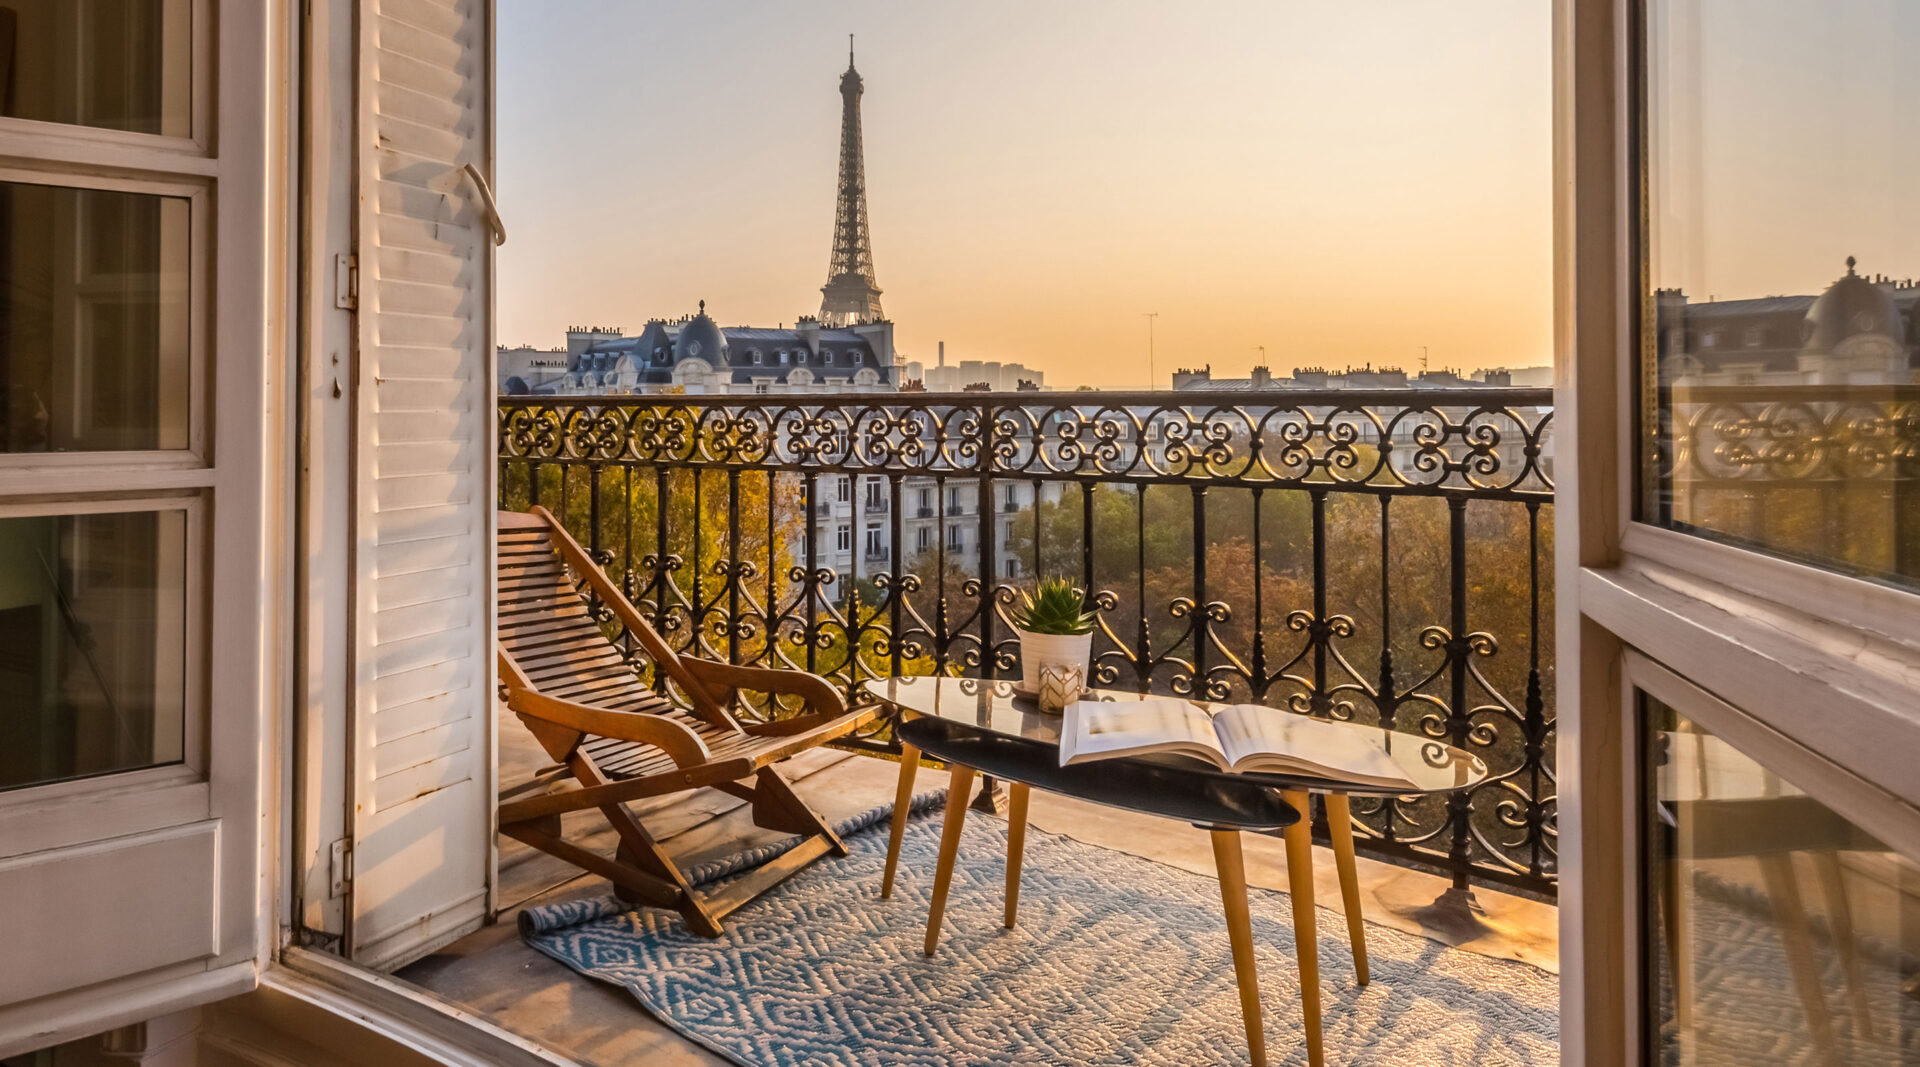 15 luxury hotels in Paris that will make your jaw drop